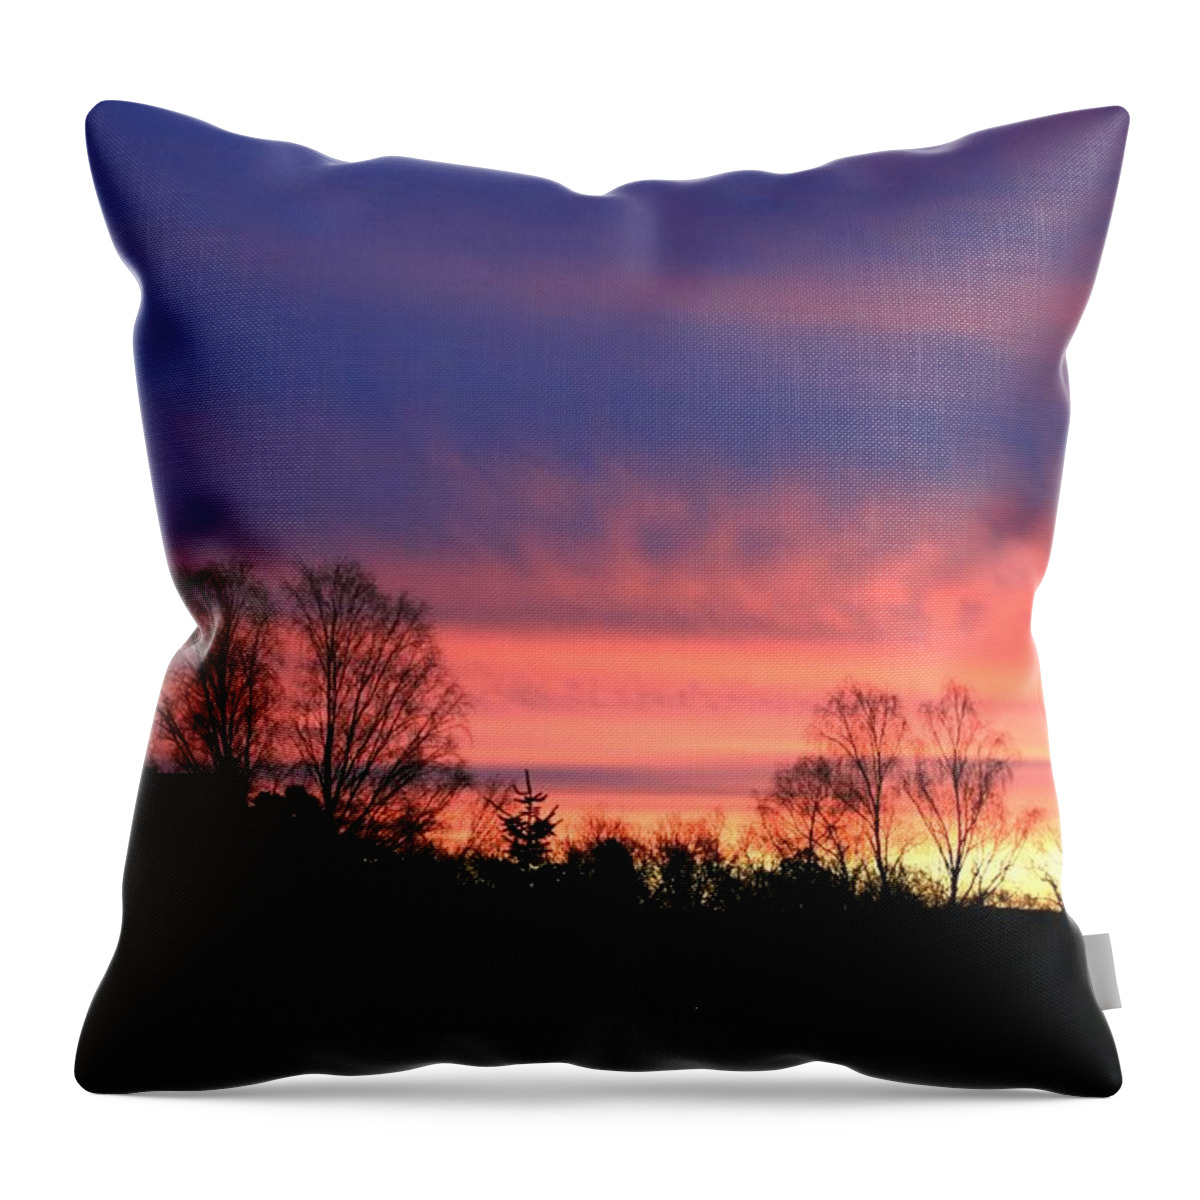 Church God Christian Norway Scandinavia Europe Outdoors Nature Landscape View Winter Colorful Beautiful Beauty Pretty Fabulous Good Bright Peaceful Place Georgous Day Tradtional Building Architecture Trees View Panorama Outdoors Nature Landscape Trees Tree Throw Pillow featuring the digital art Beautiful Sunset by the Church by Jeanette Rode Dybdahl